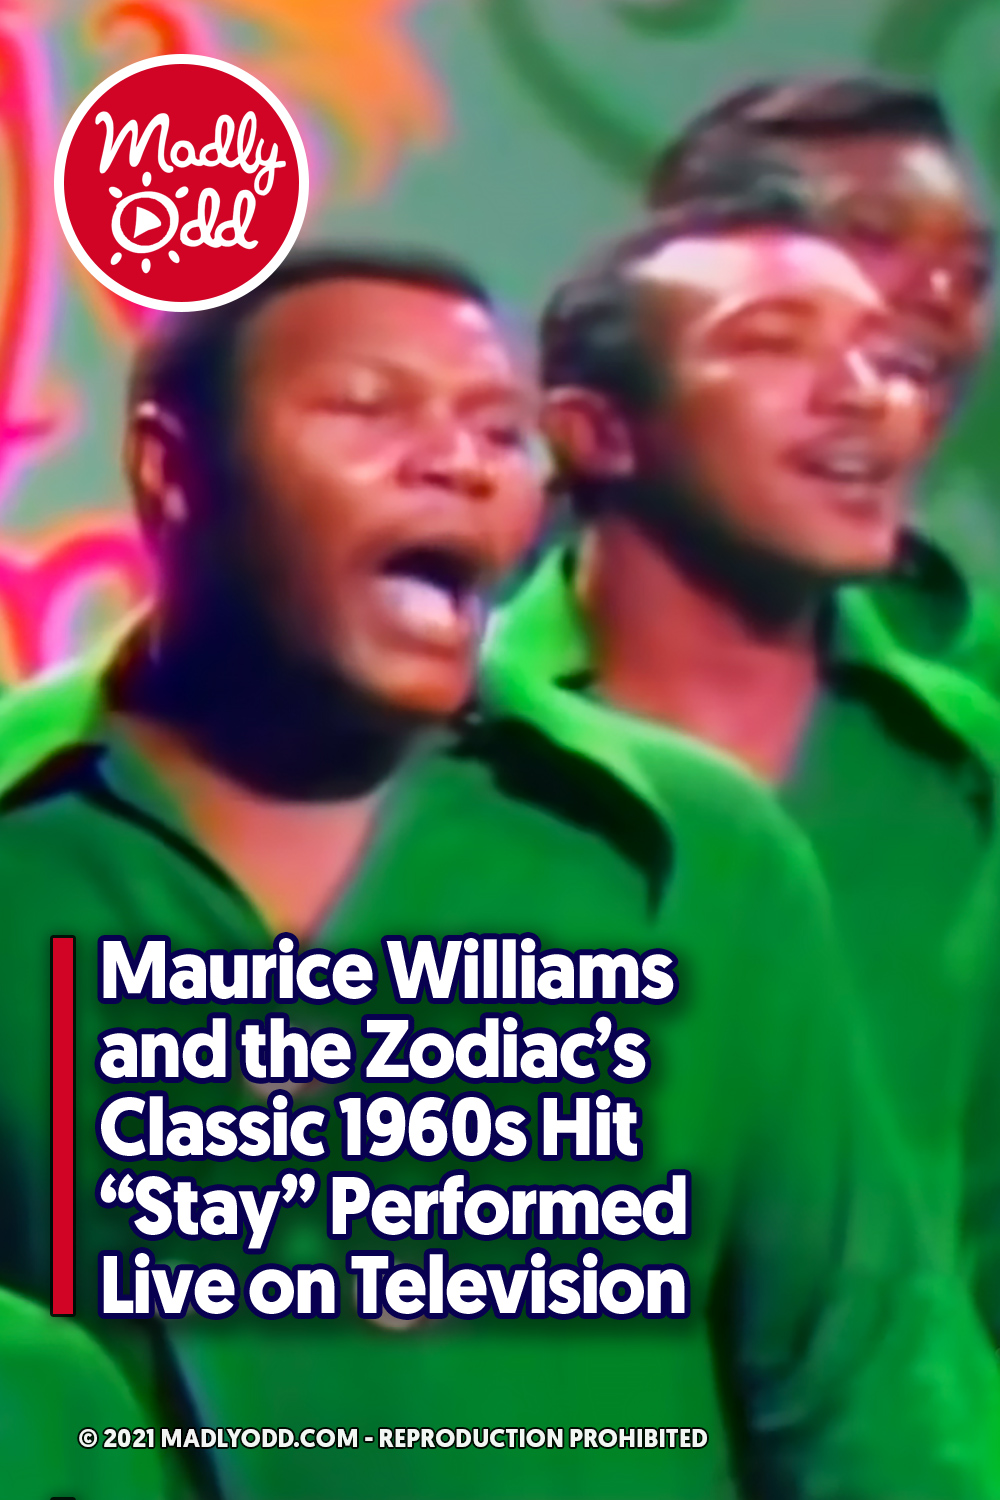 Maurice Williams and the Zodiac’s Classic 1960s Hit “Stay” Performed Live on Television